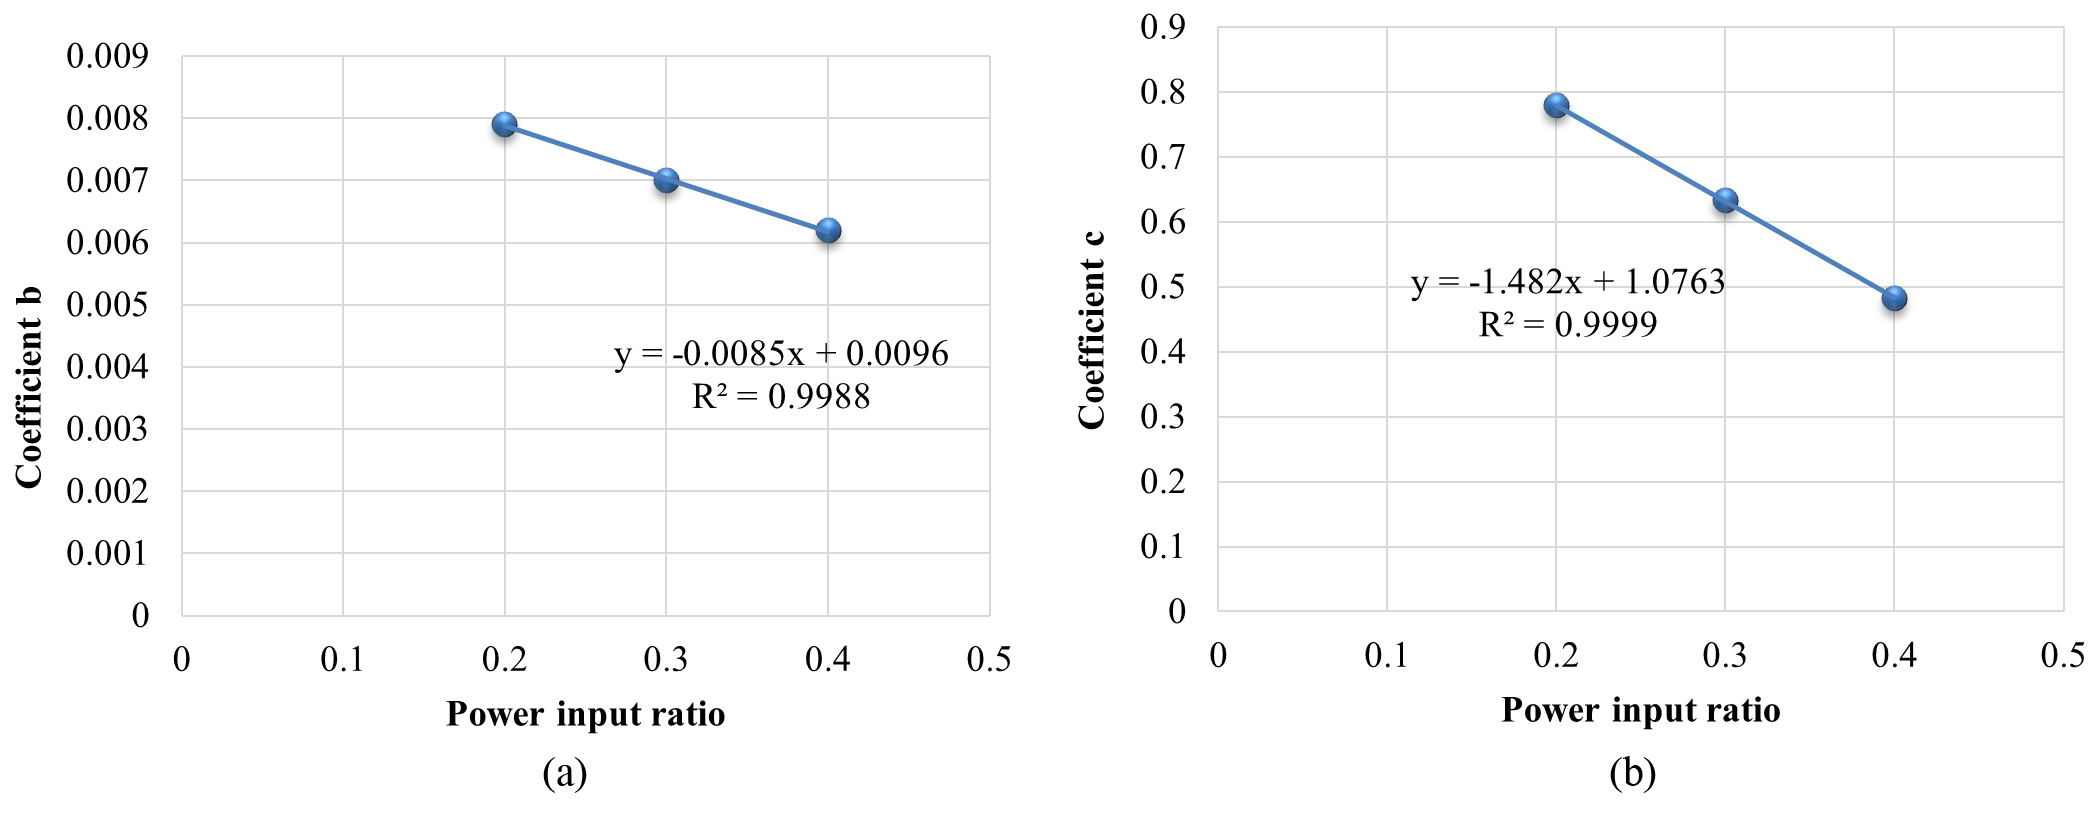 Relationship of power input fraction and coefficients b and c for medium daylight penetration model with 500 lux maintained illuminance for coefficients (a) b and (b) c.